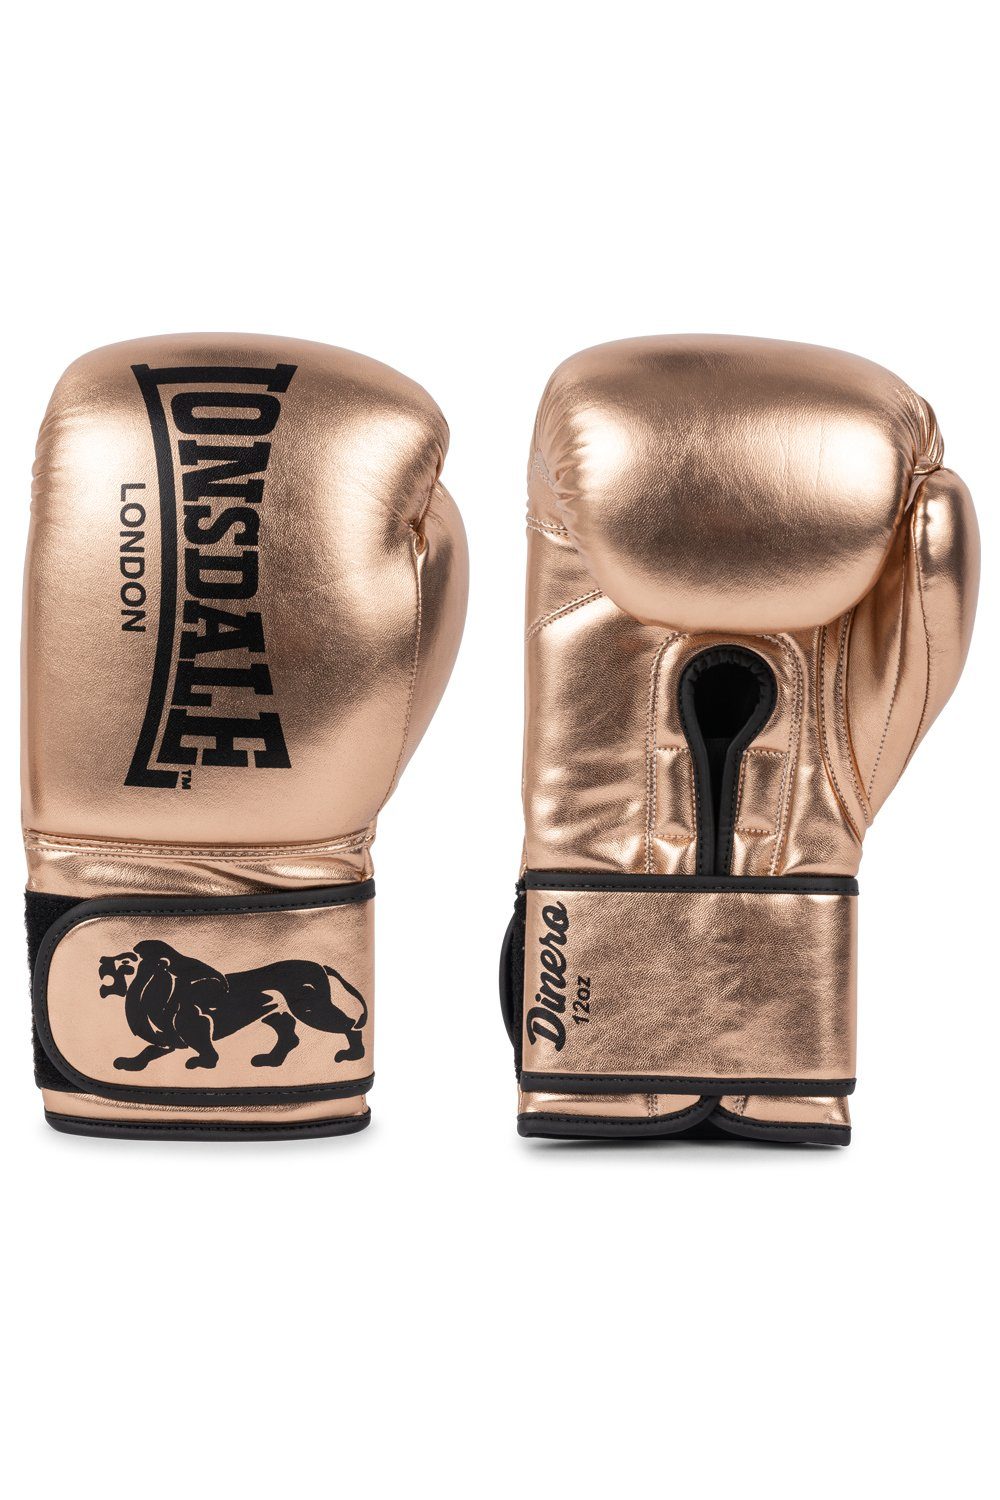 DINERO Boxhandschuhe Lonsdale